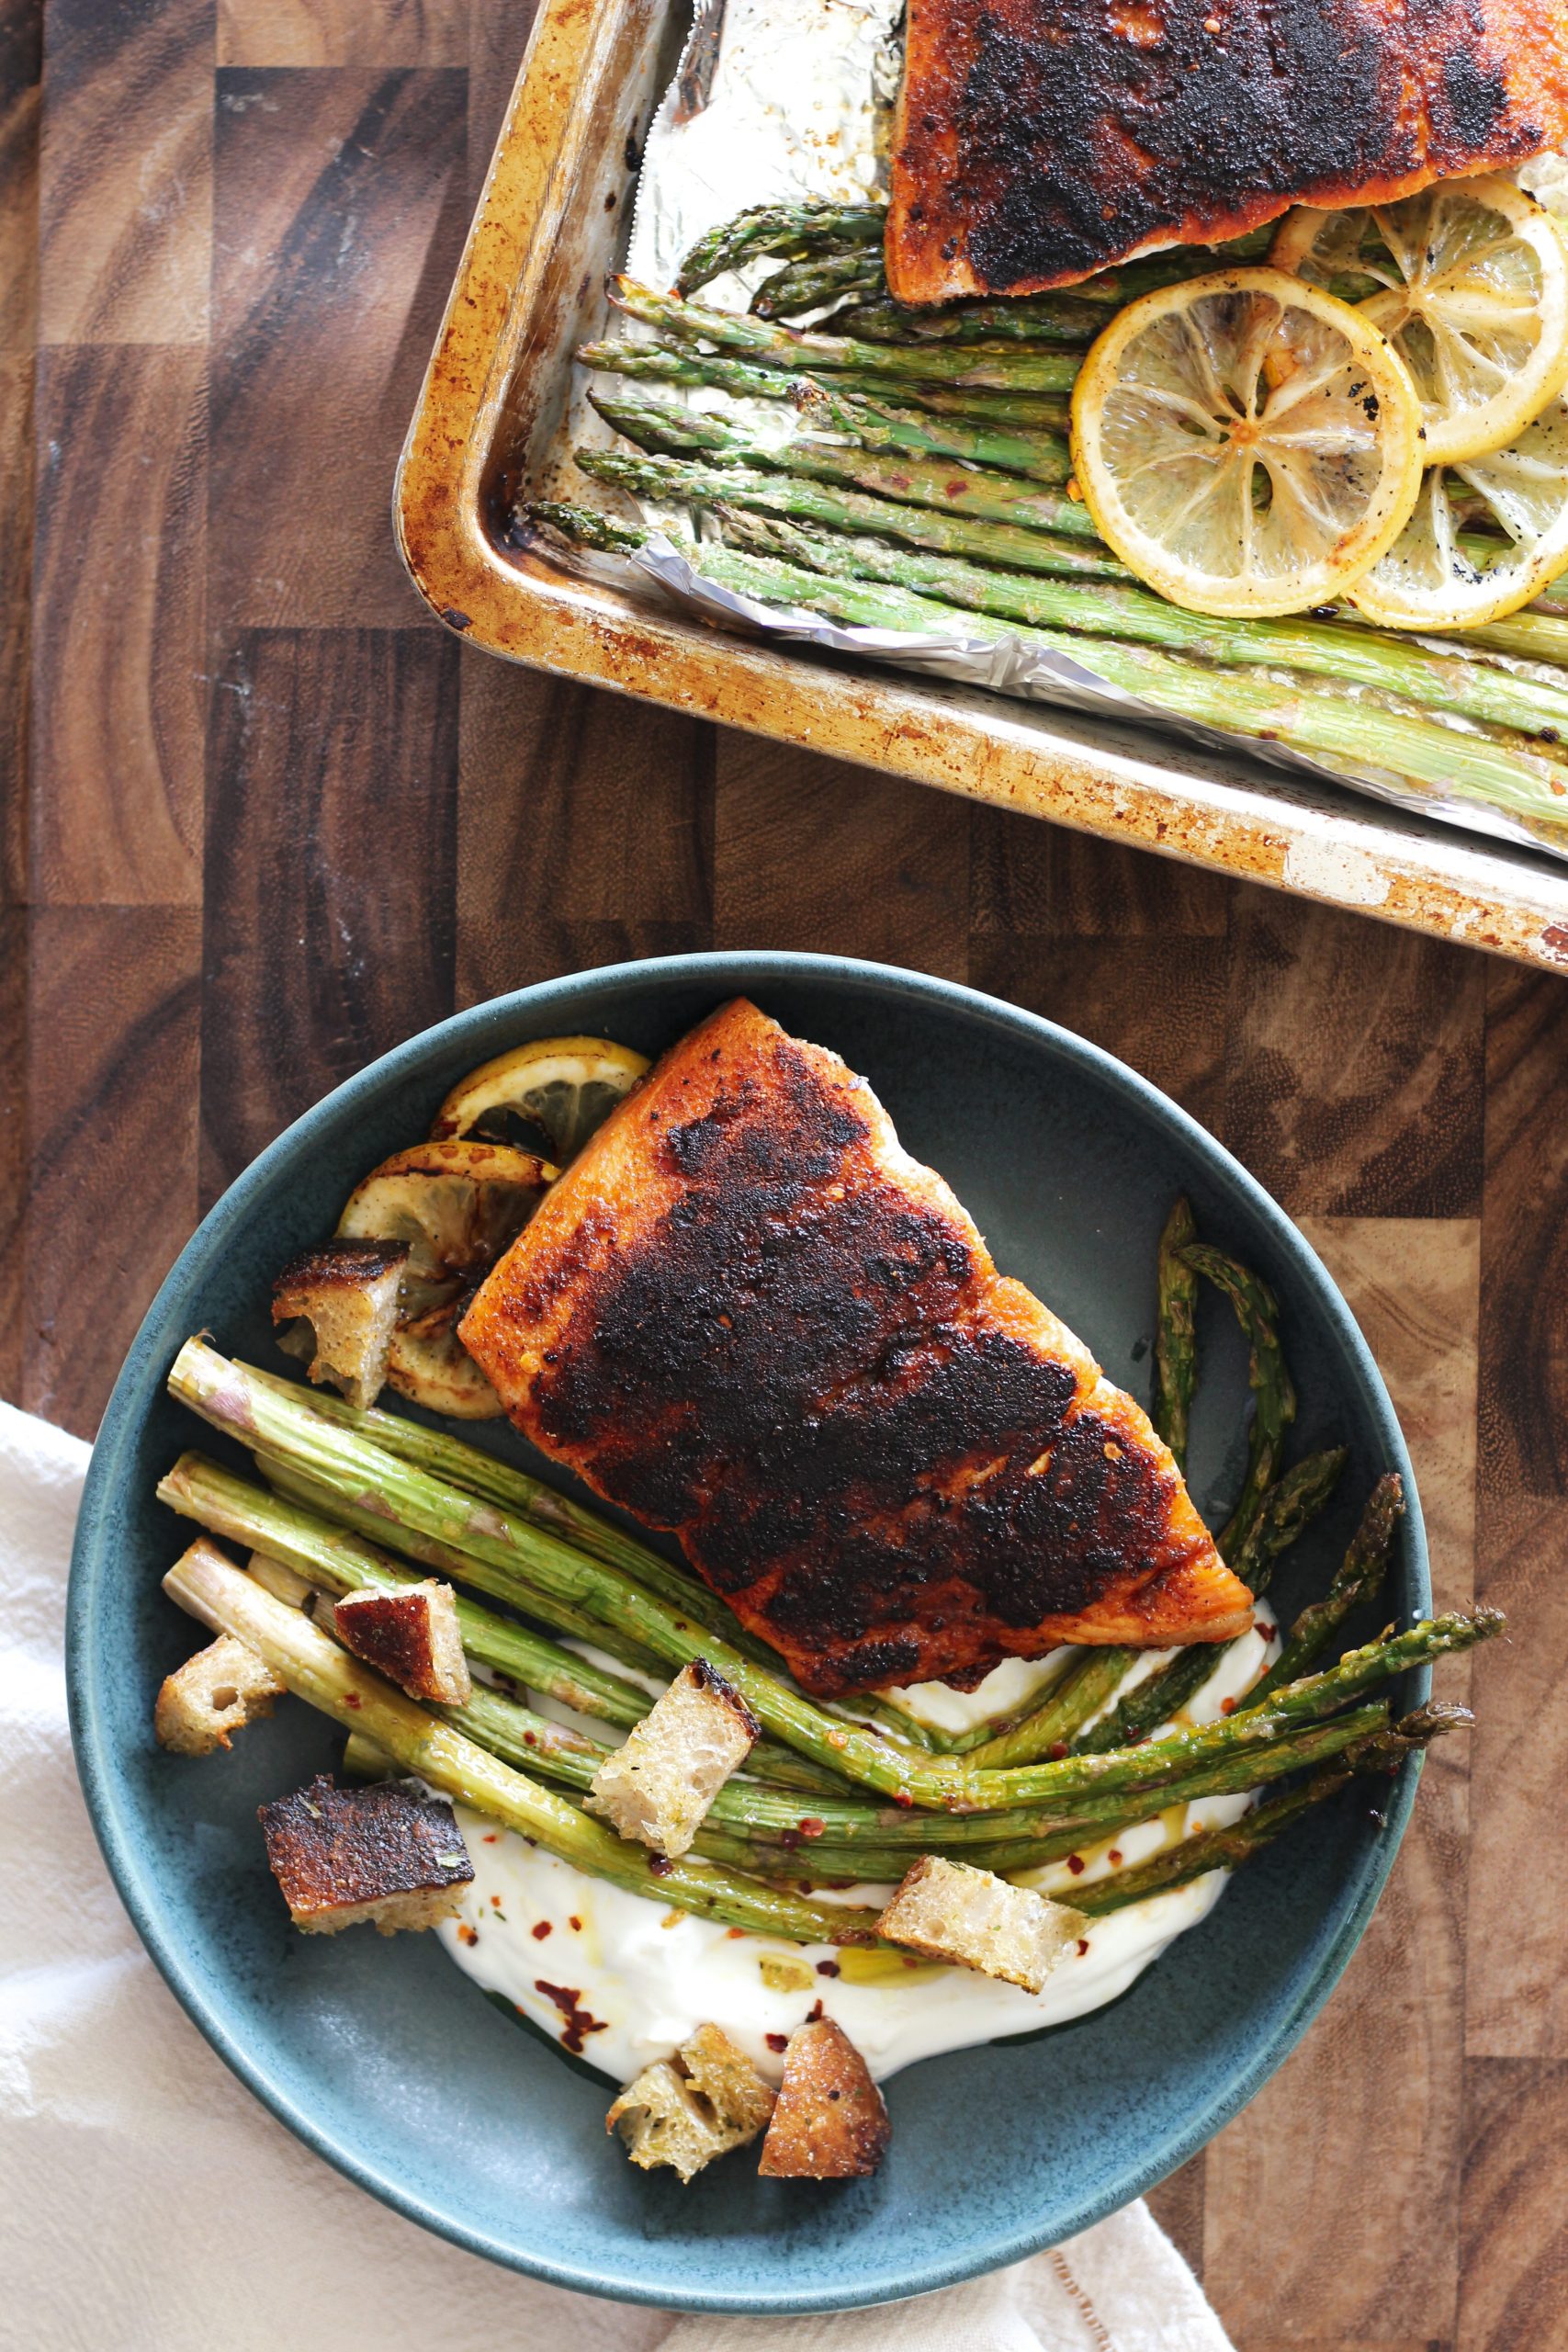 Spicy Blackened Salmon with Roasted Tangy Lemon Garlic Asparagus